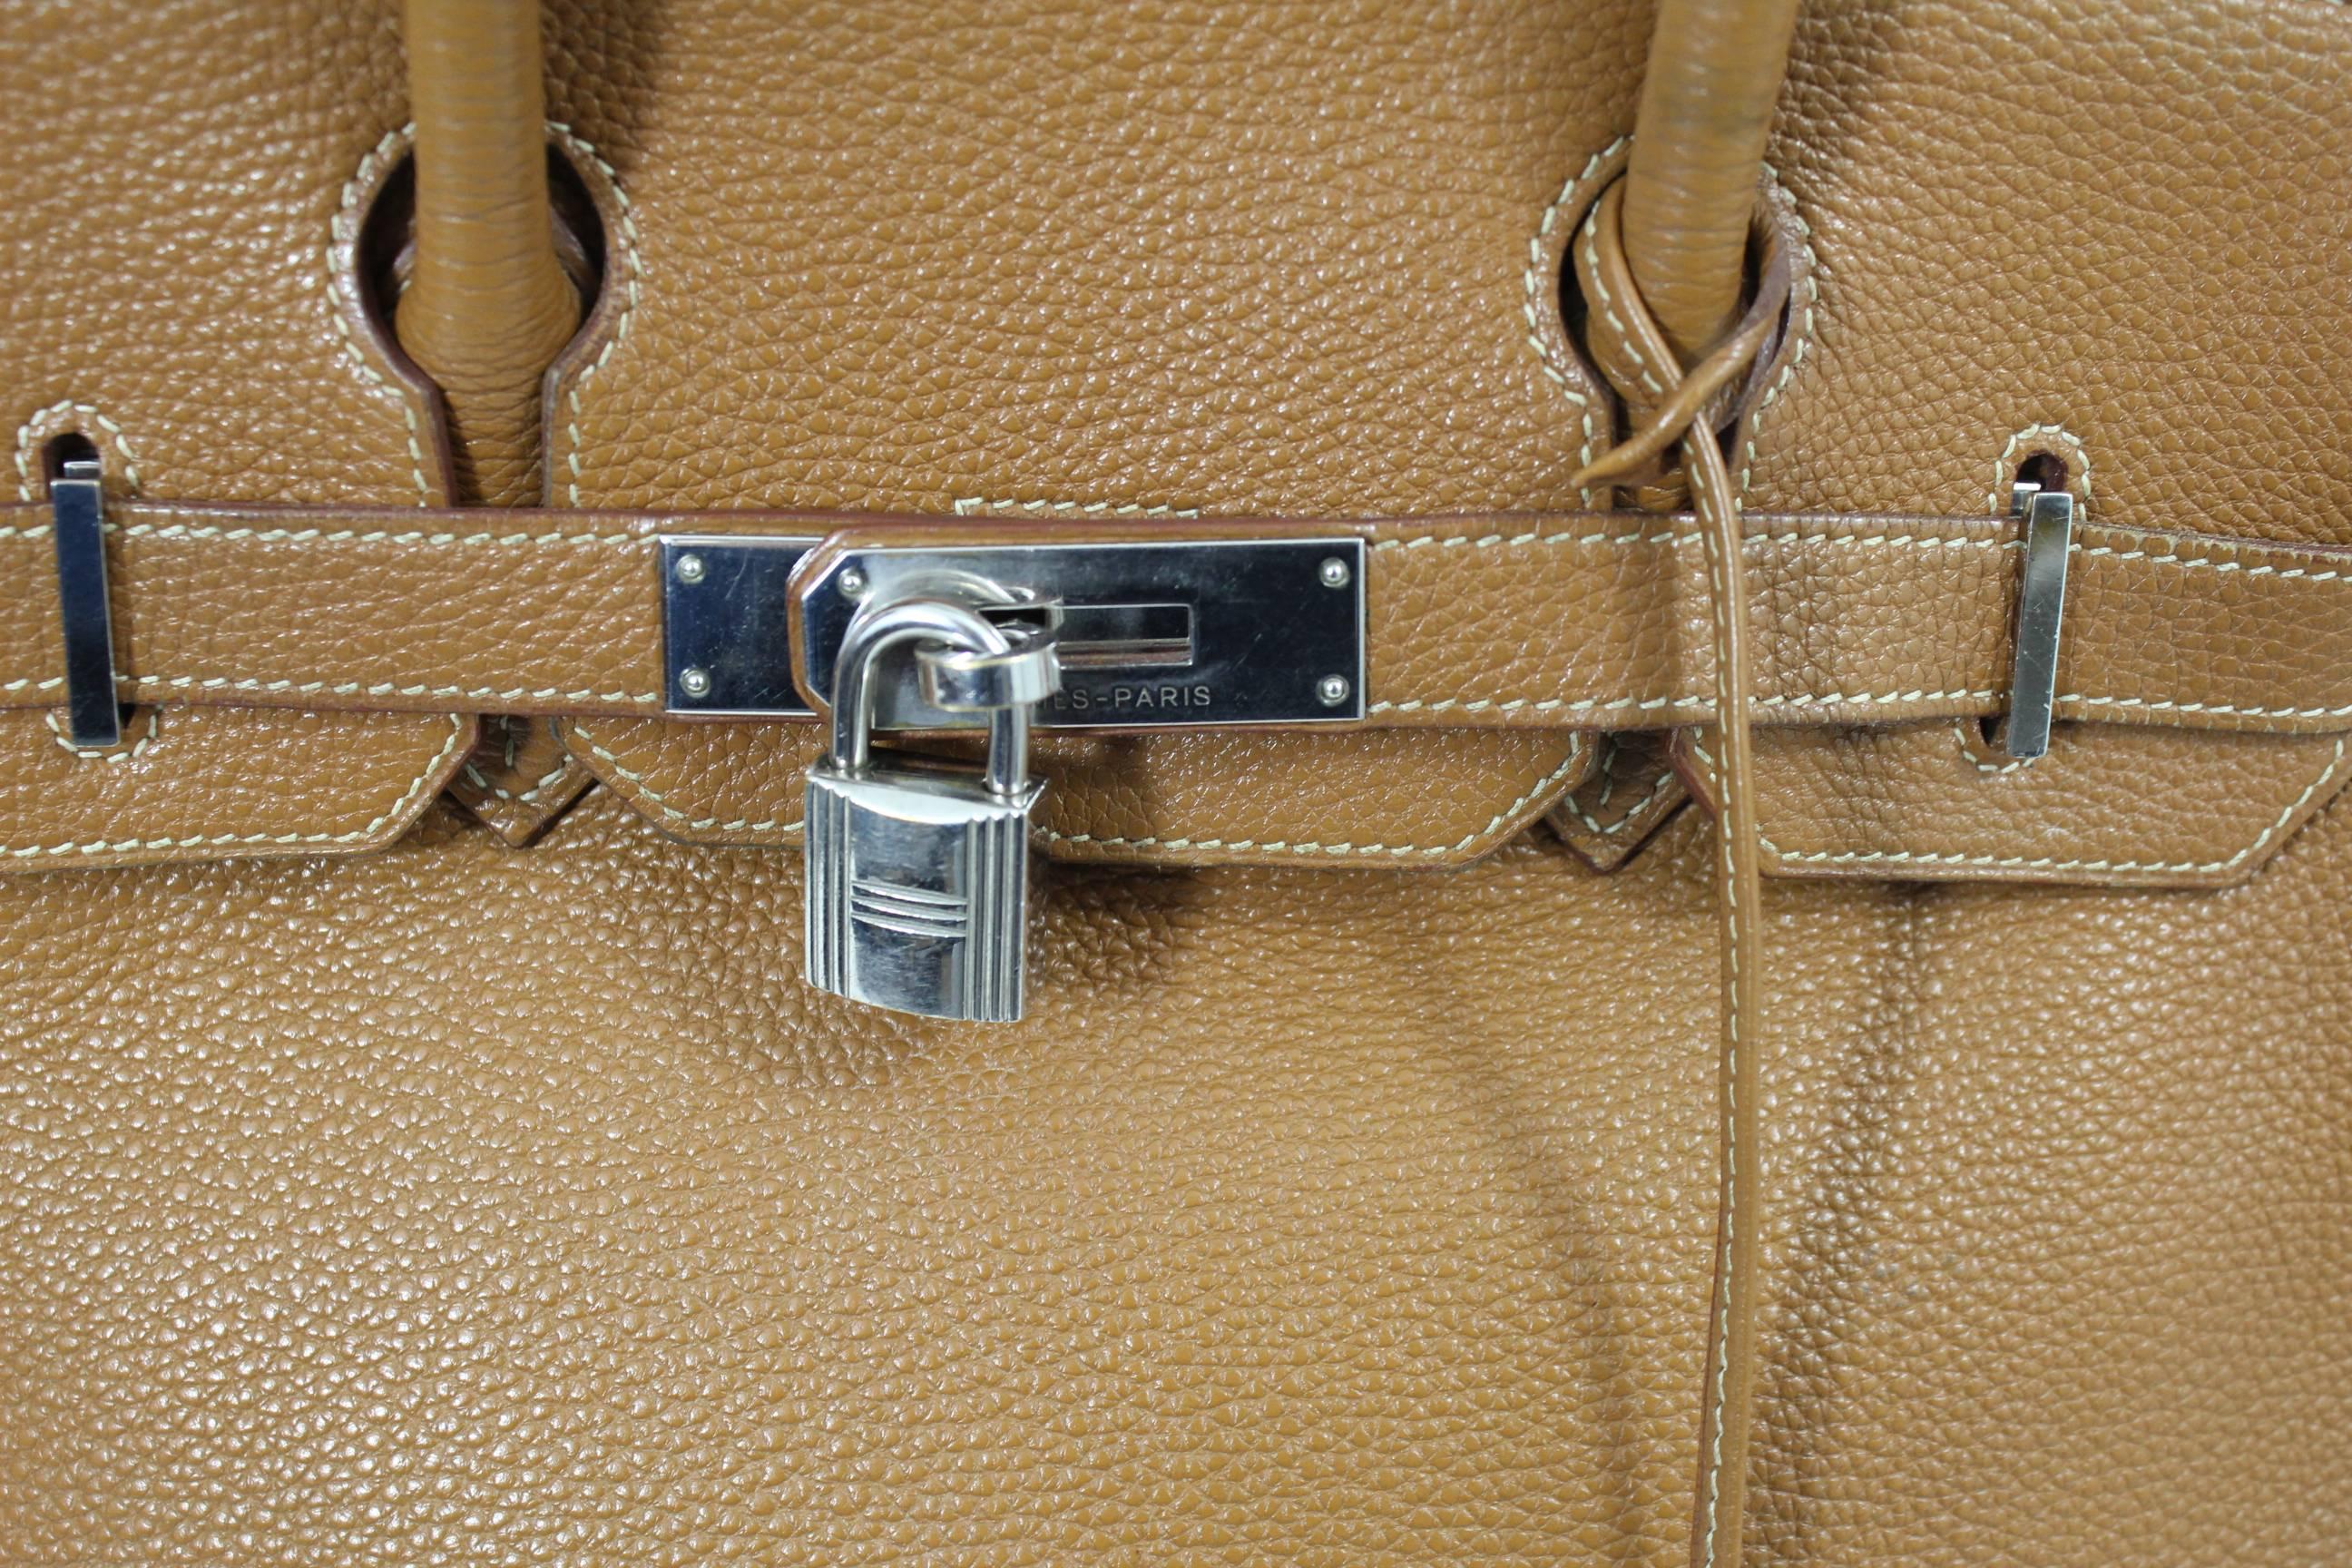 Women's Hermes Birkin 30 Bag in Gold Leather with padlock and keys Fair condition.